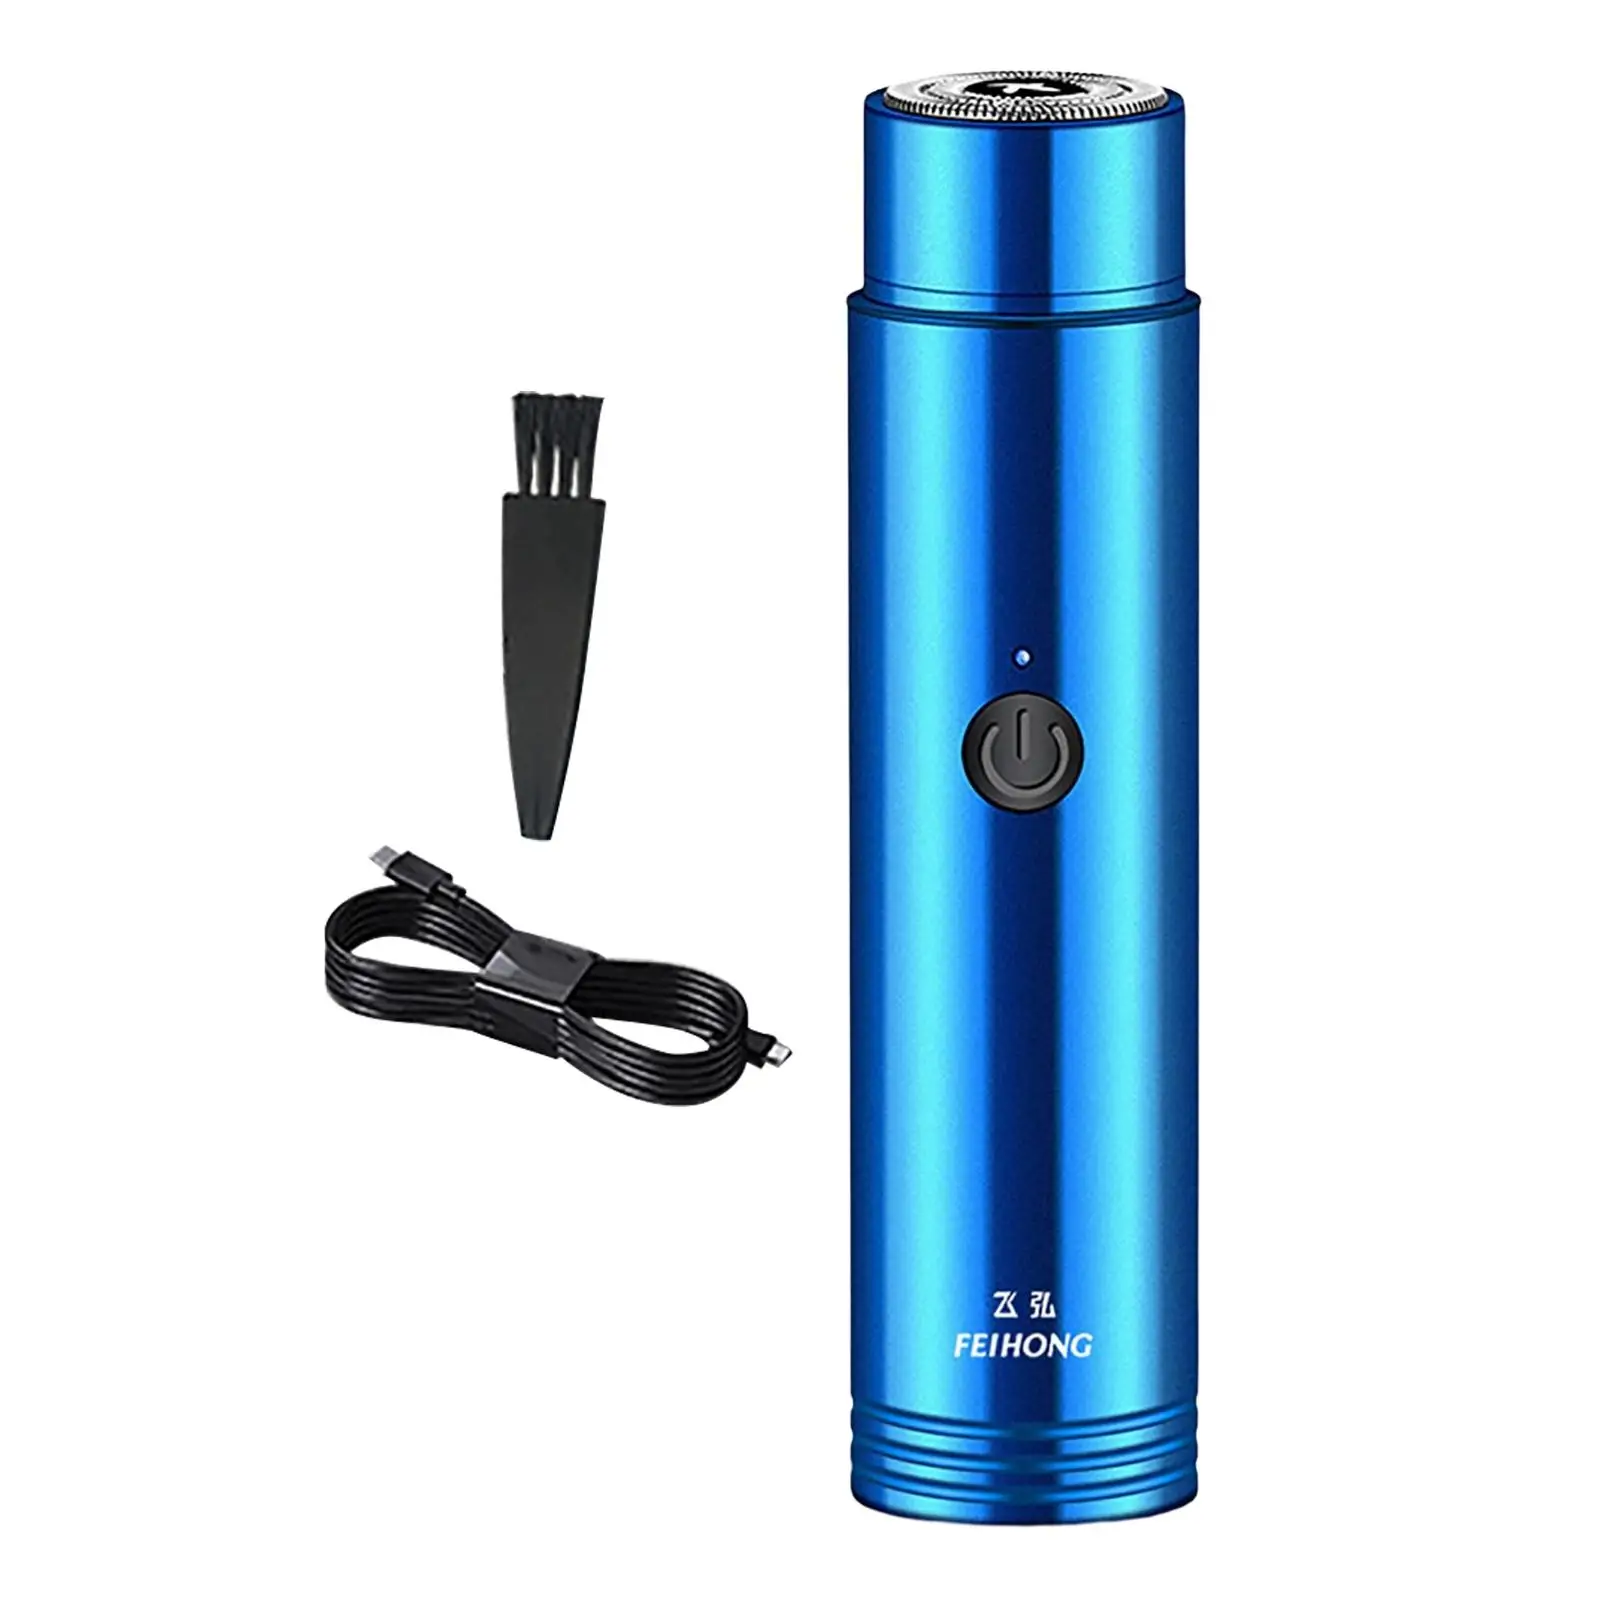 Mini Electric Shaver Portable Wet and Dry Use Lightweight Waterproof Rechargeable Rotary Razor Easy to Clean for Travel Razor